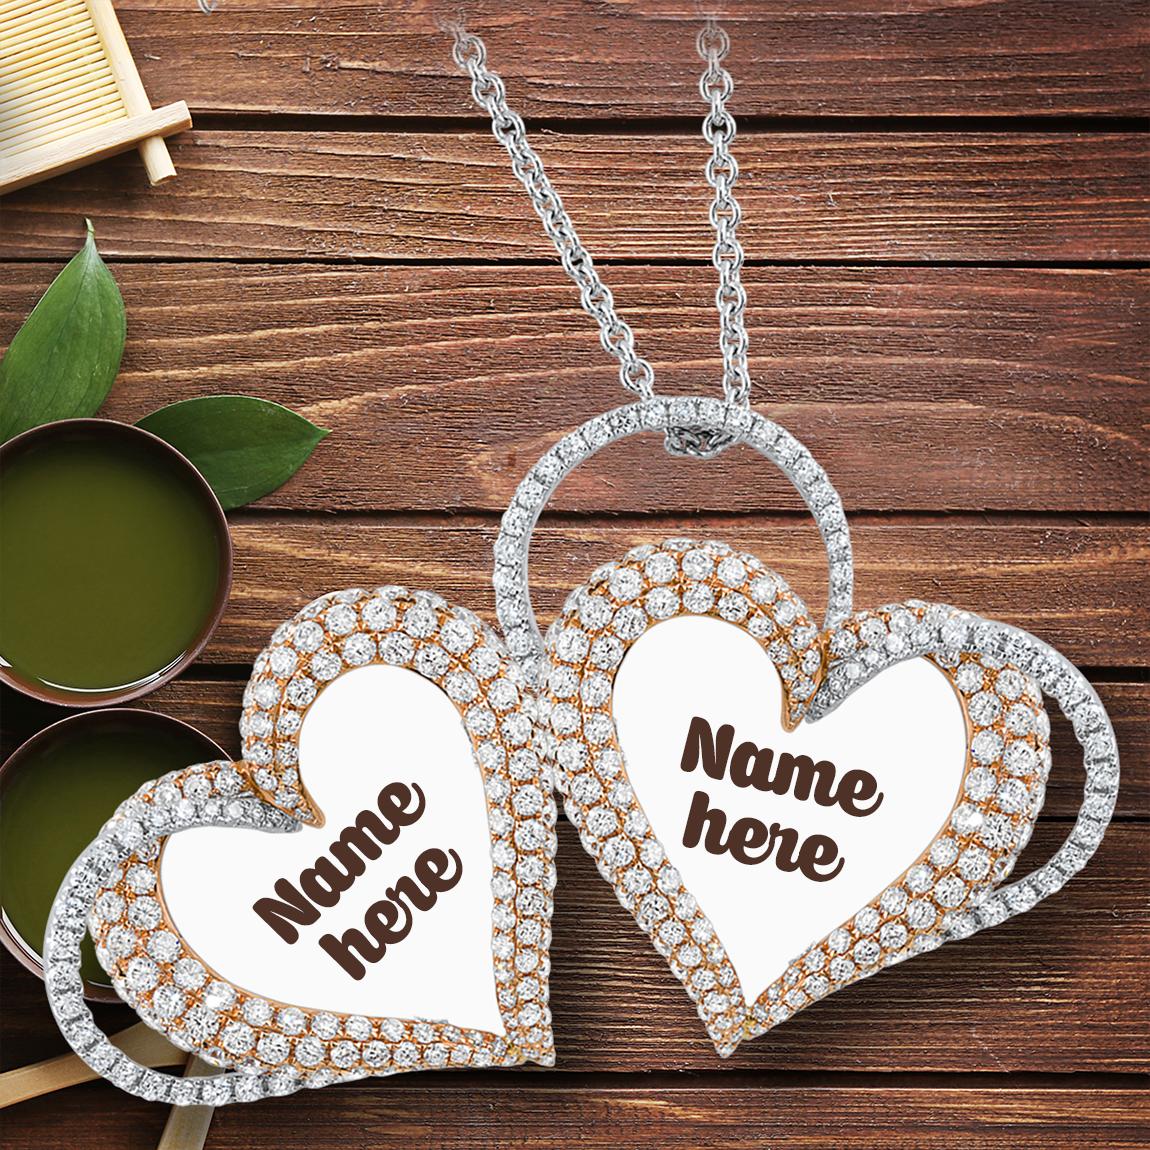 Write Name On Locket for Android - APK Download